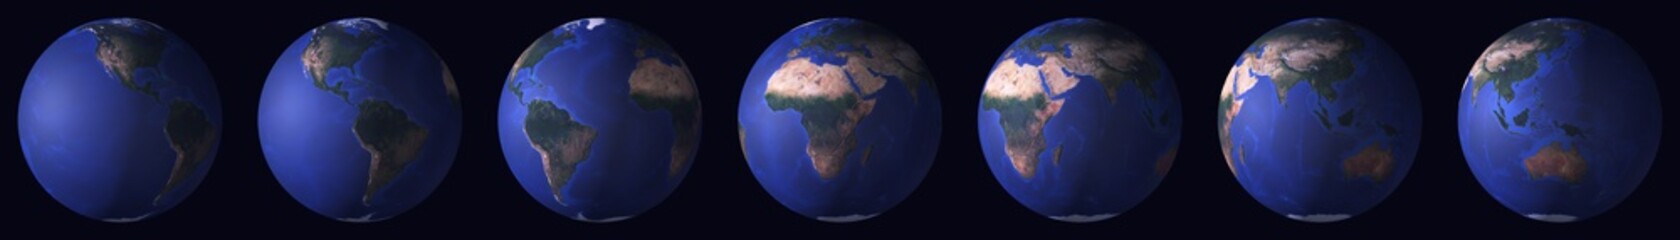 Our planet. Set of 3d renders shows Earth without atmosphere, only surface. Render with nice resolution- small details and terrain heights are present.